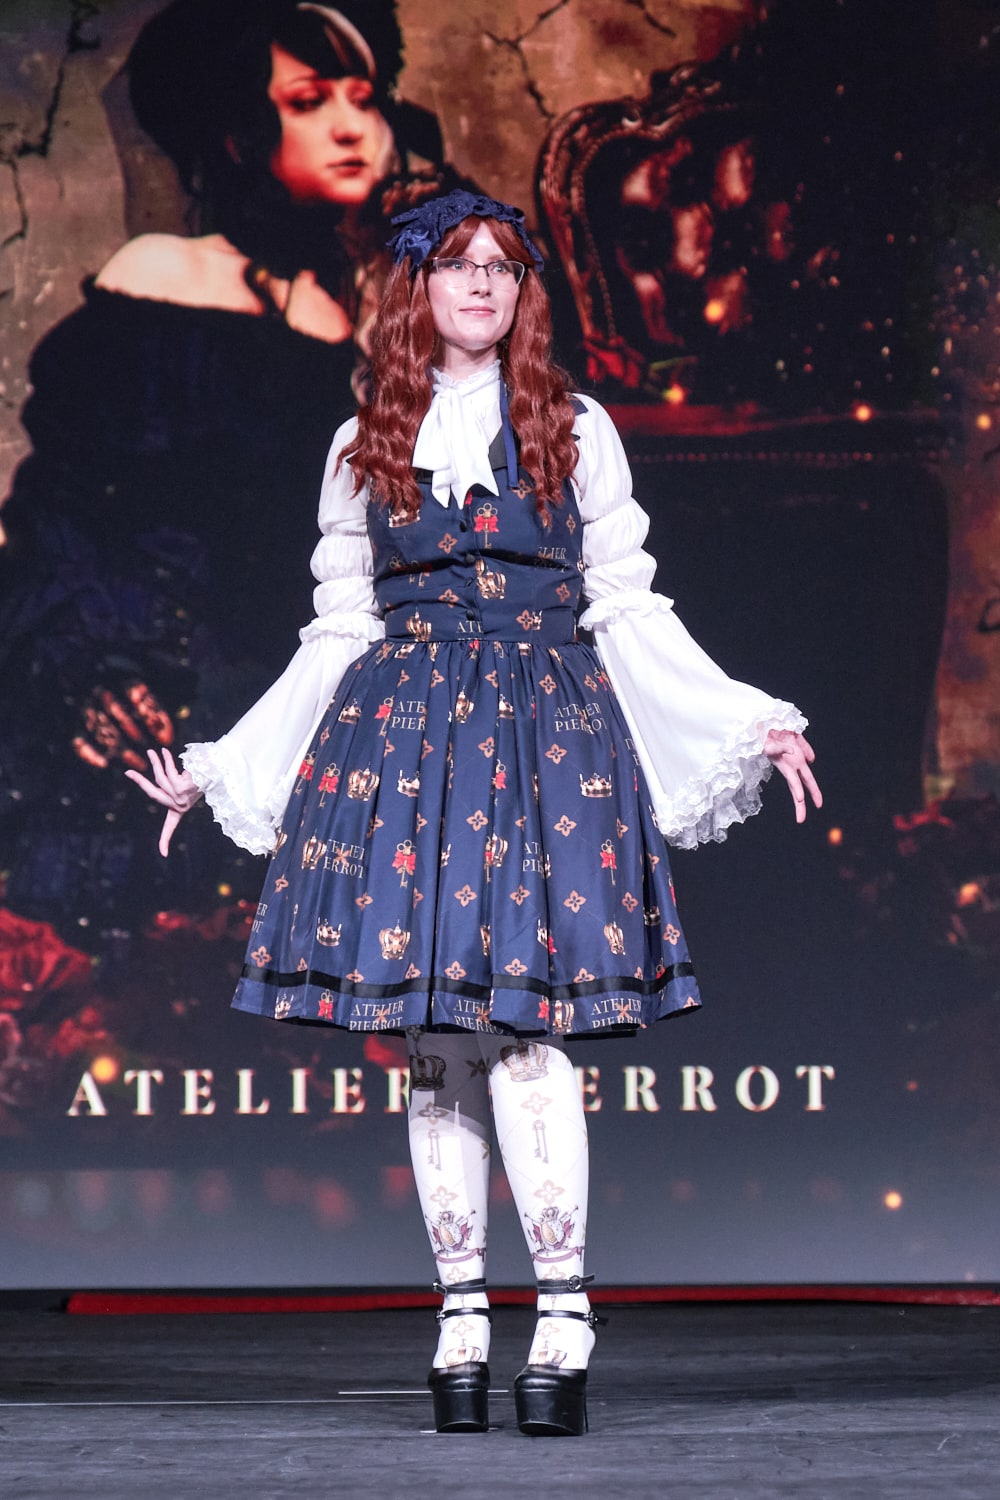 Atelier Pierrot classic lolita model wearing white princess sleeve blouse with crown print vest-style jumperskirt and matching crown tights - full body standing pose 2.